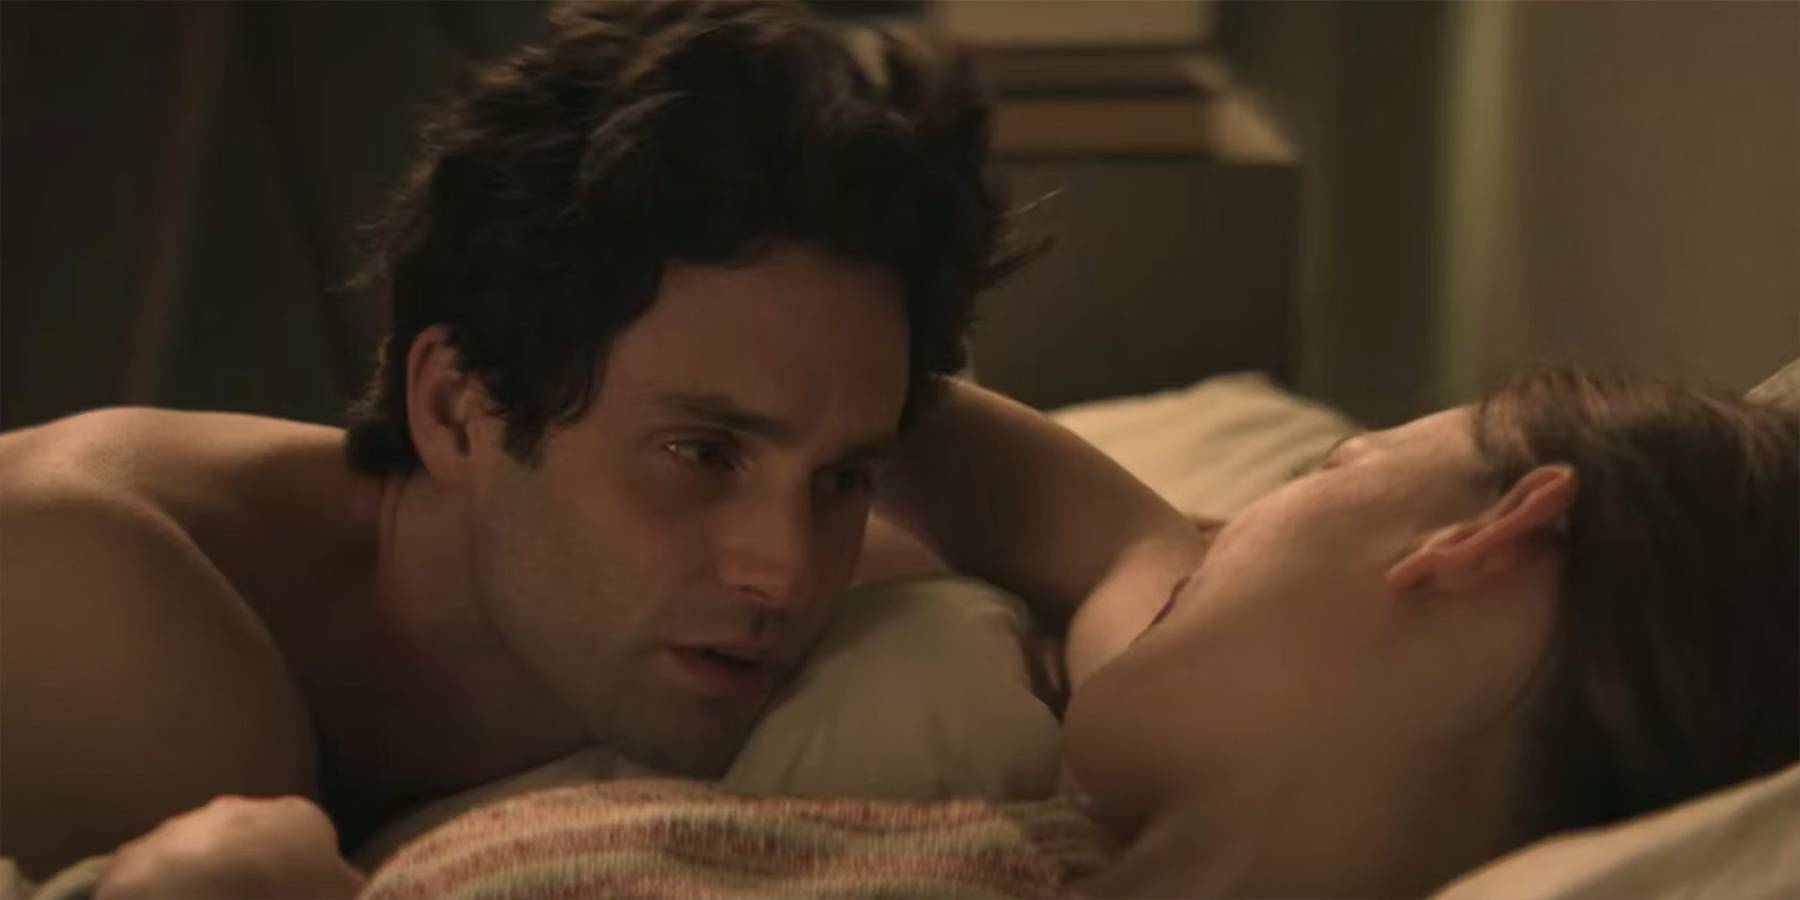 Penn badgley doesnt want to do sex scenes